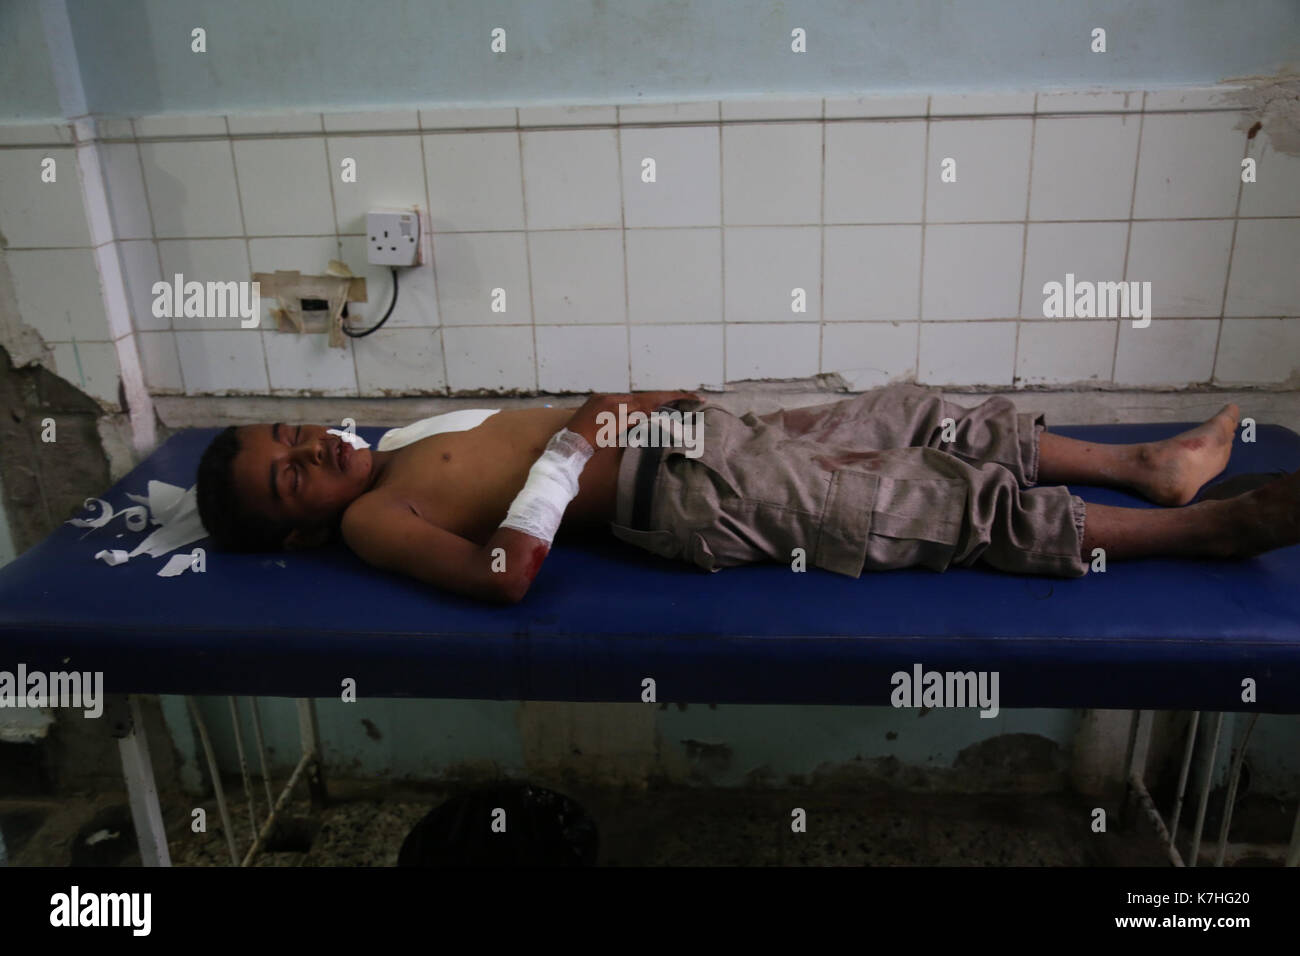 Civilians are treated in the Revolution hospital in the centre of Taiz for various injuries, following artillery shelling in residential neighbourhoods of the Yemeni city. 15th Sep, 2017. The bombardment was carried out by the Ansar Allah movement (Houthi) and their allied forces loyal to former Yemeni president Ali Abdullah Salih. Three missiles targeted the neighbourhoods of Shab Dima, of the Al-Sameel market, and of Jiula Al-Haud, located in the west of Taiz, killing three children and injuring ten civilians Credit: Abdulnaser Alseddik/ImagesLive/ZUMA Wire/Alamy Live News Stock Photo